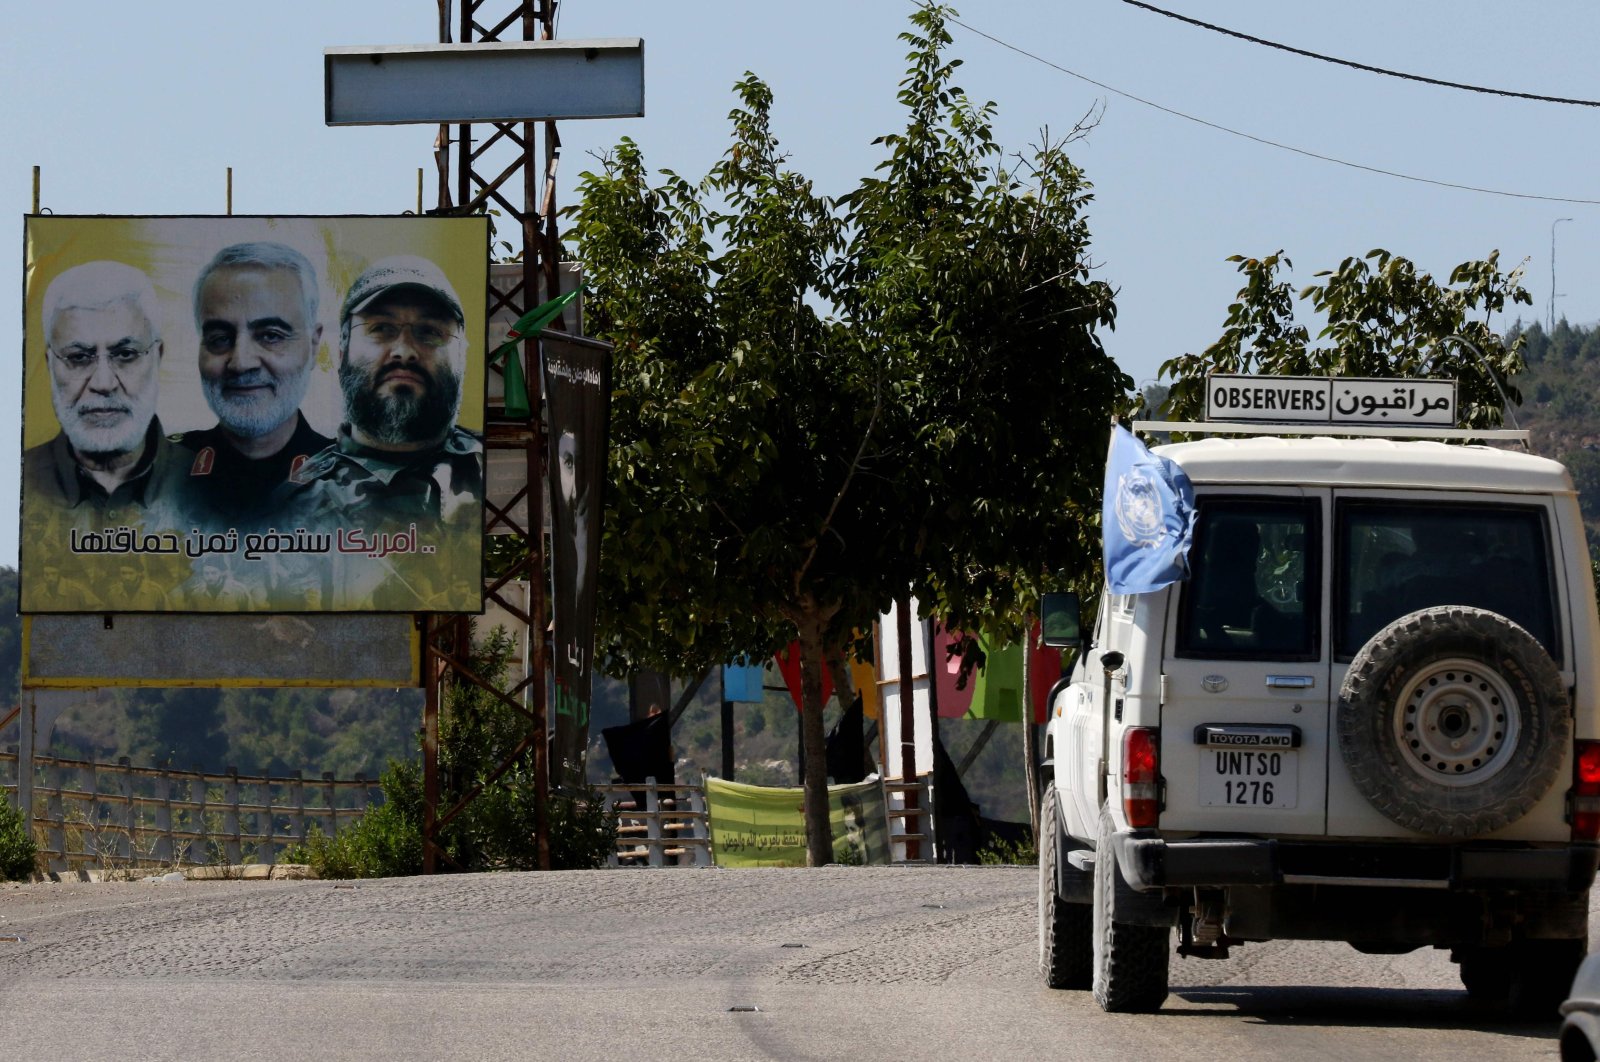 A UNIFIL patrol drives past a billboard showing the faces of slain Iraqi Hashed al-Shaabi (Popular Mobilisation) forces commander Abu Mahdi al-Muhandis (L), Iranian Quds Force commander Qasem Soleimani (C) and Hezbollah commander Imad Mughniyeh (R), in the southern Lebanese village of Adaisseh on the border with Israel, Aug. 26, 2020. (AFP Photo)